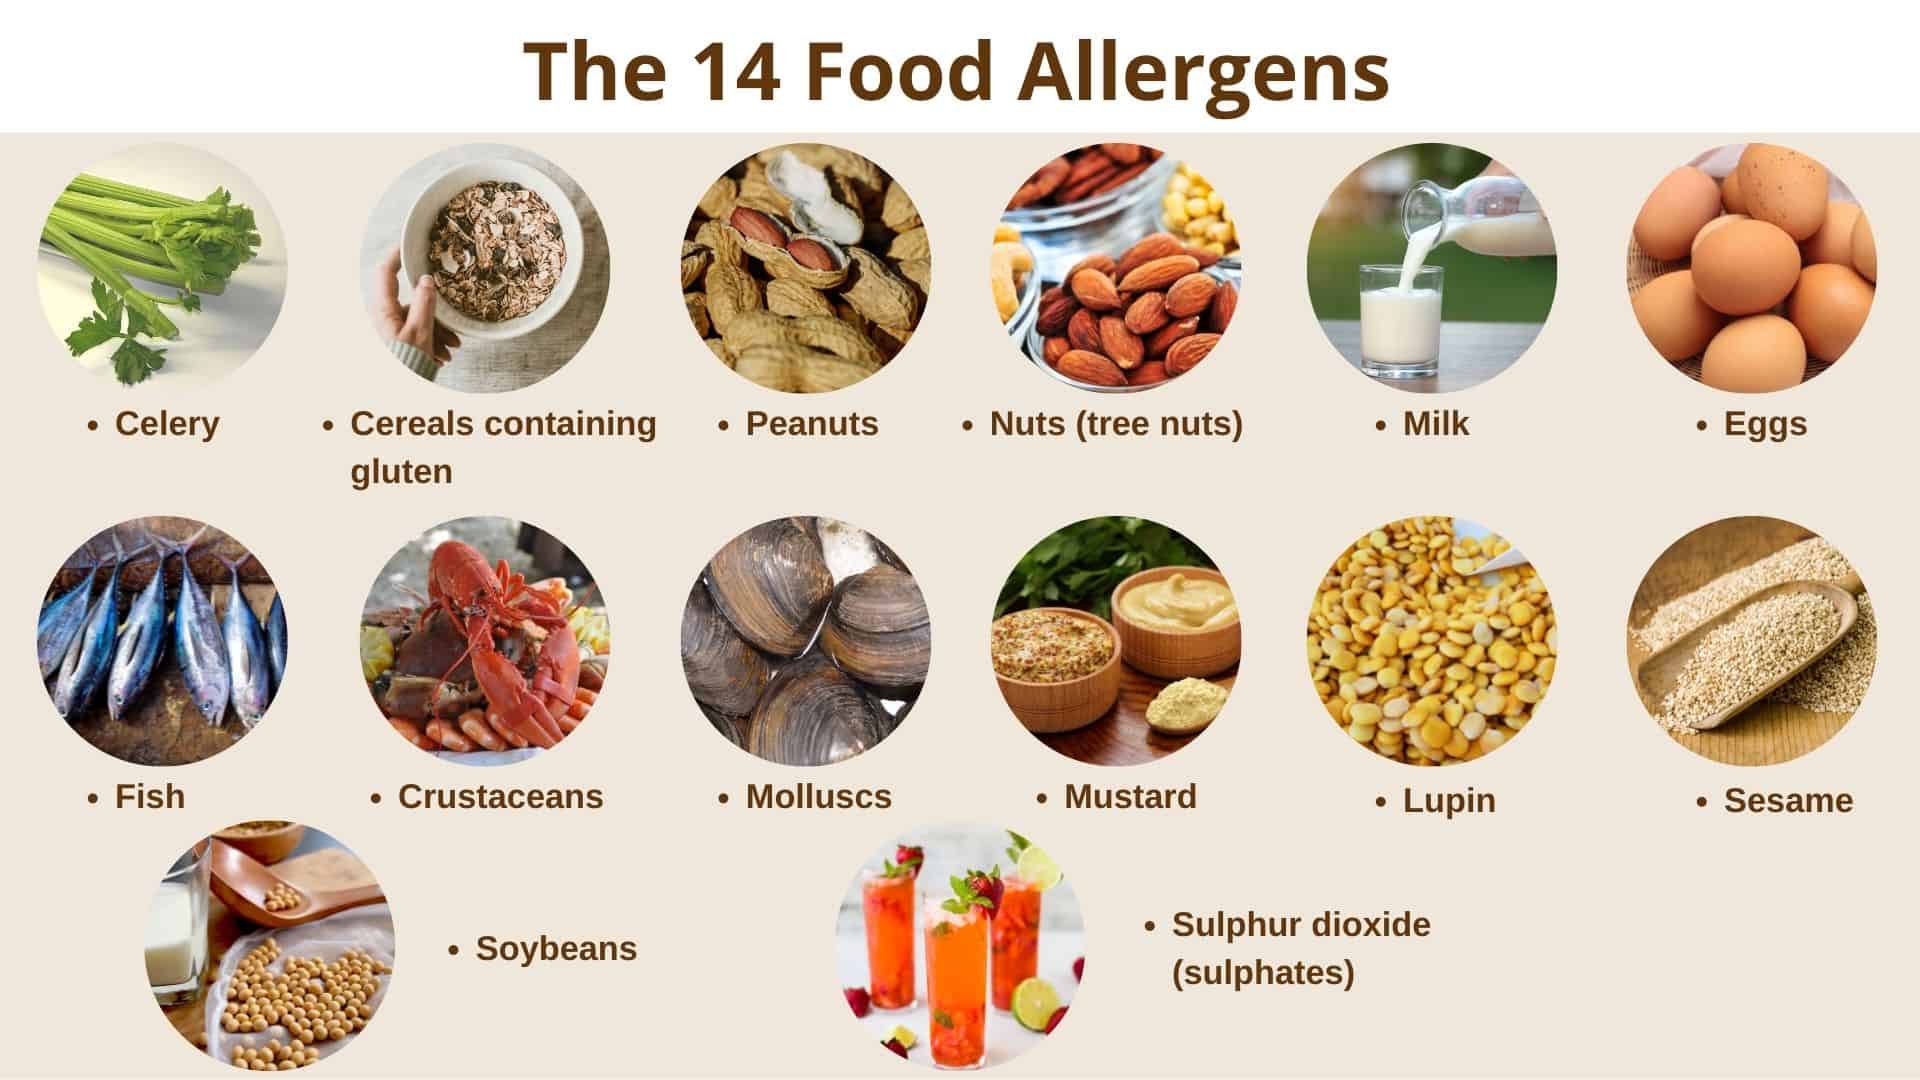 The 14 Food Allergens